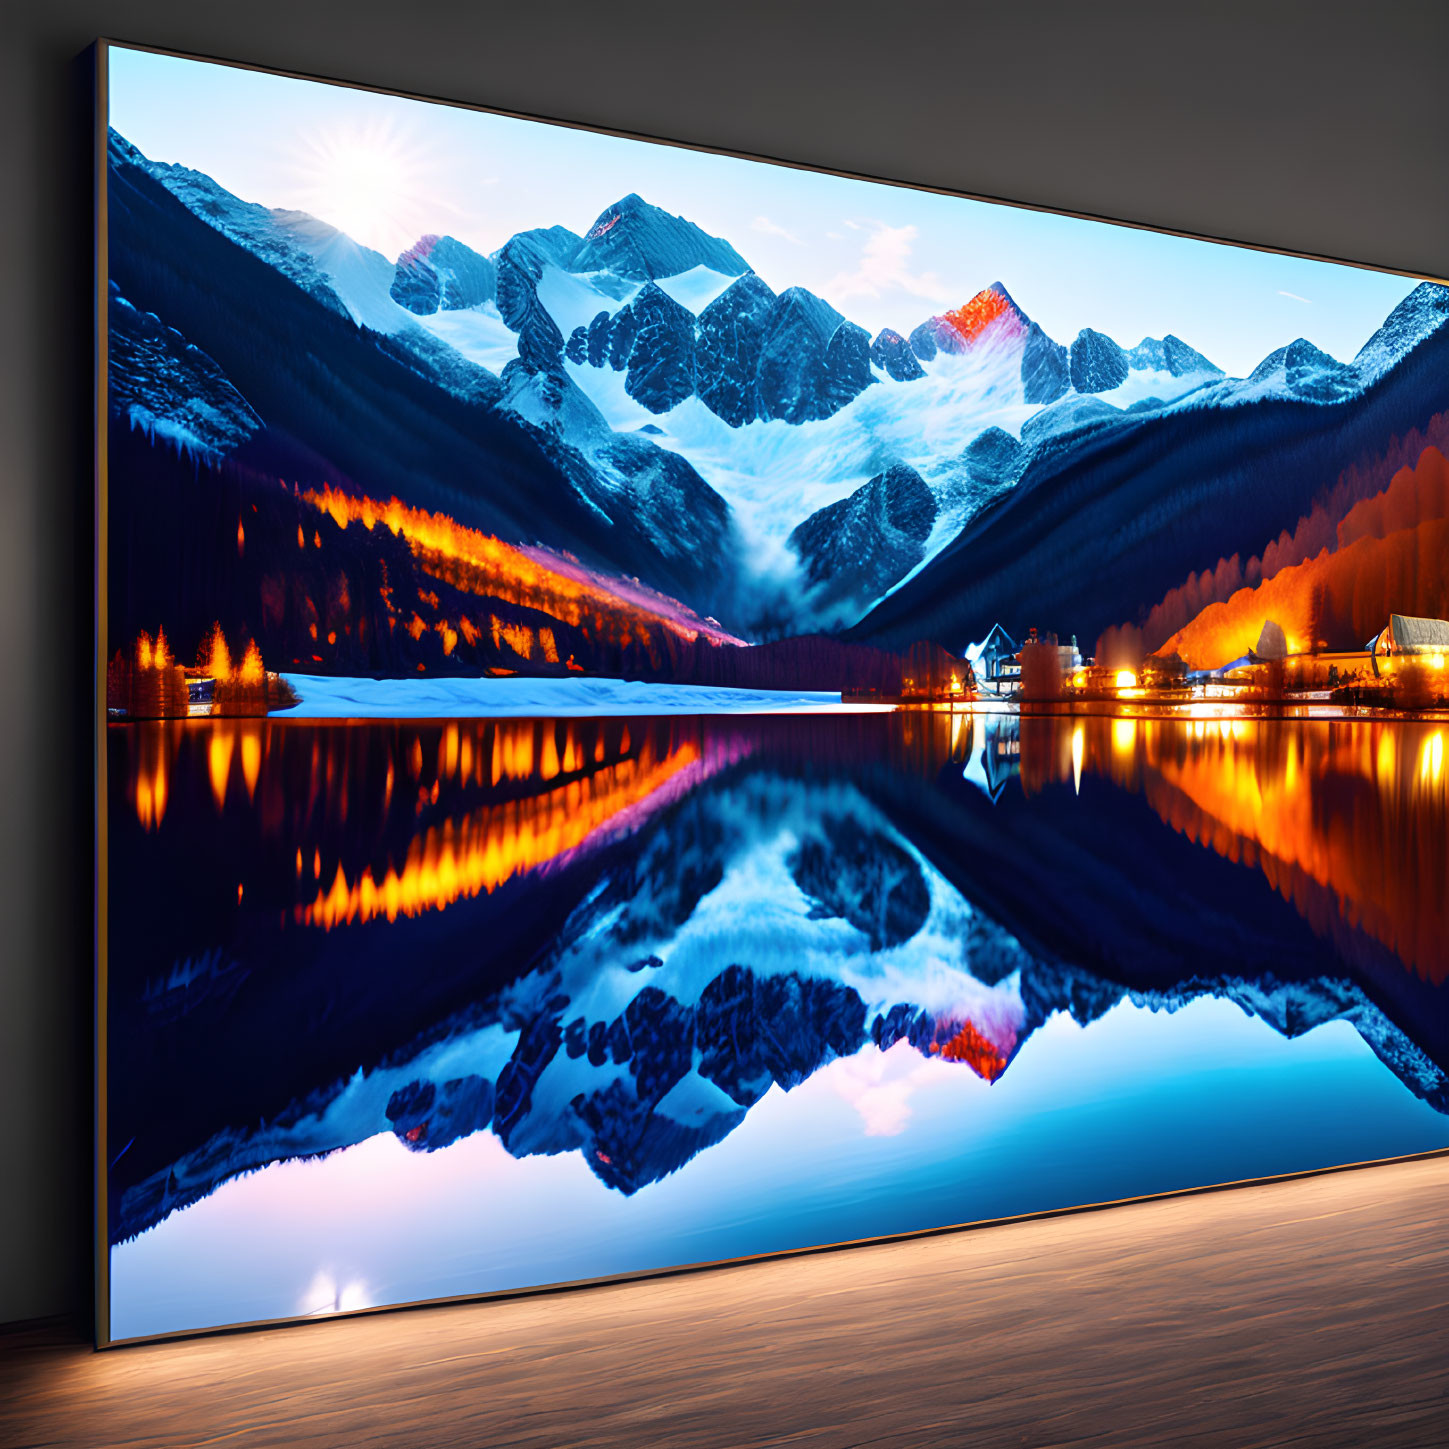 Curved Ultra-Wide Monitor Showing Vibrant Sunset Over Mountainous Landscape